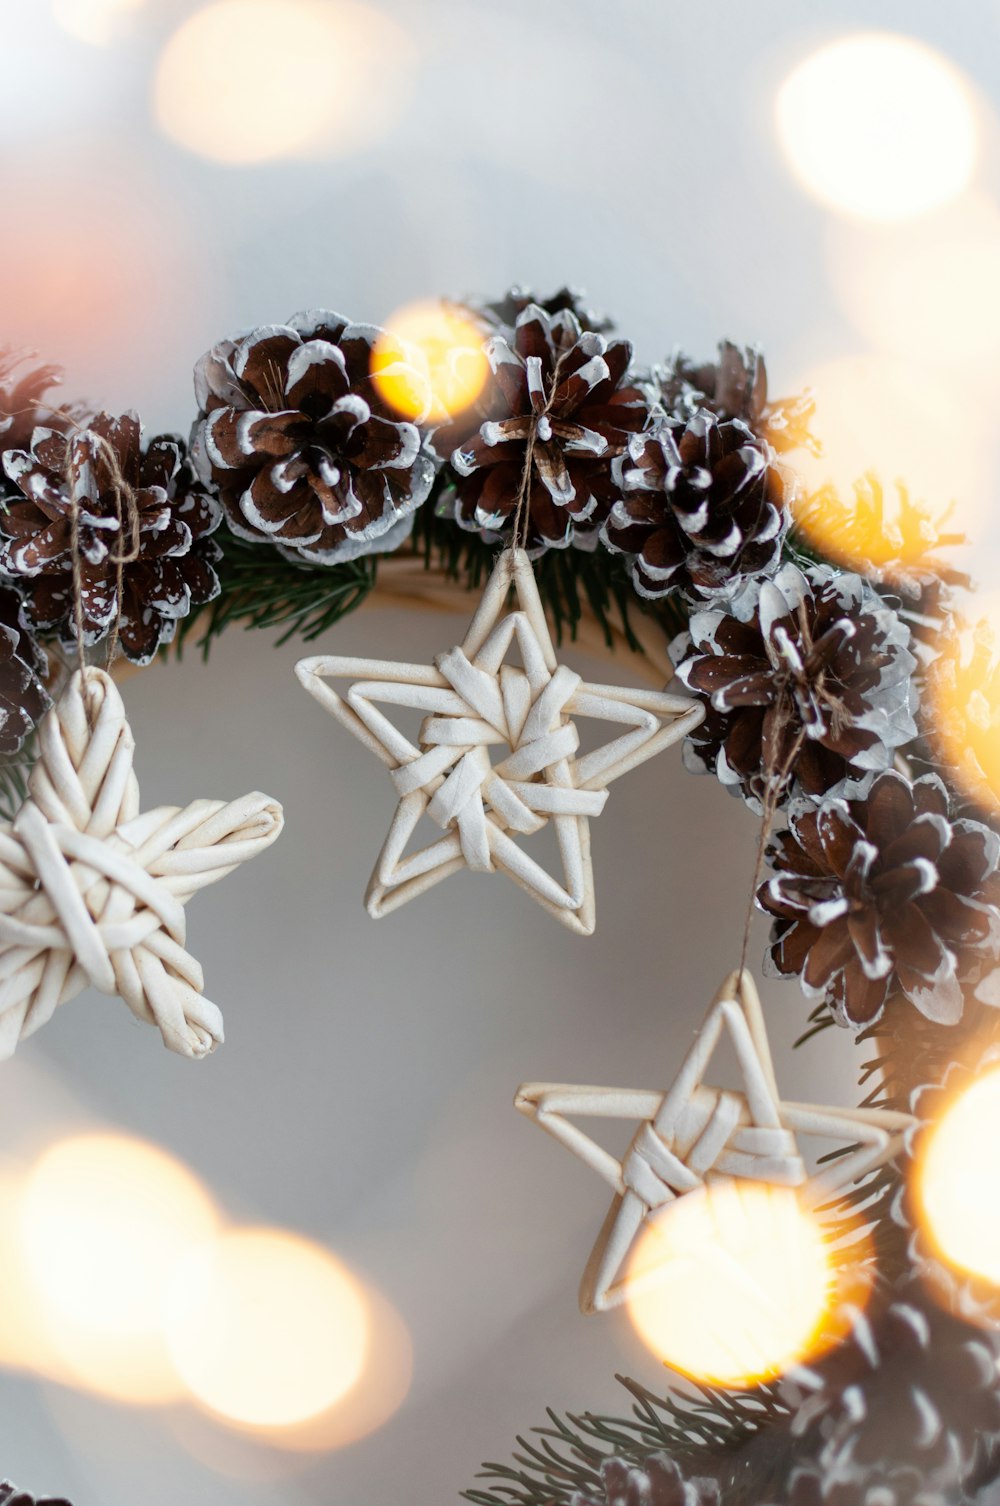 a close up of a wreath with snowflakes and pine cones